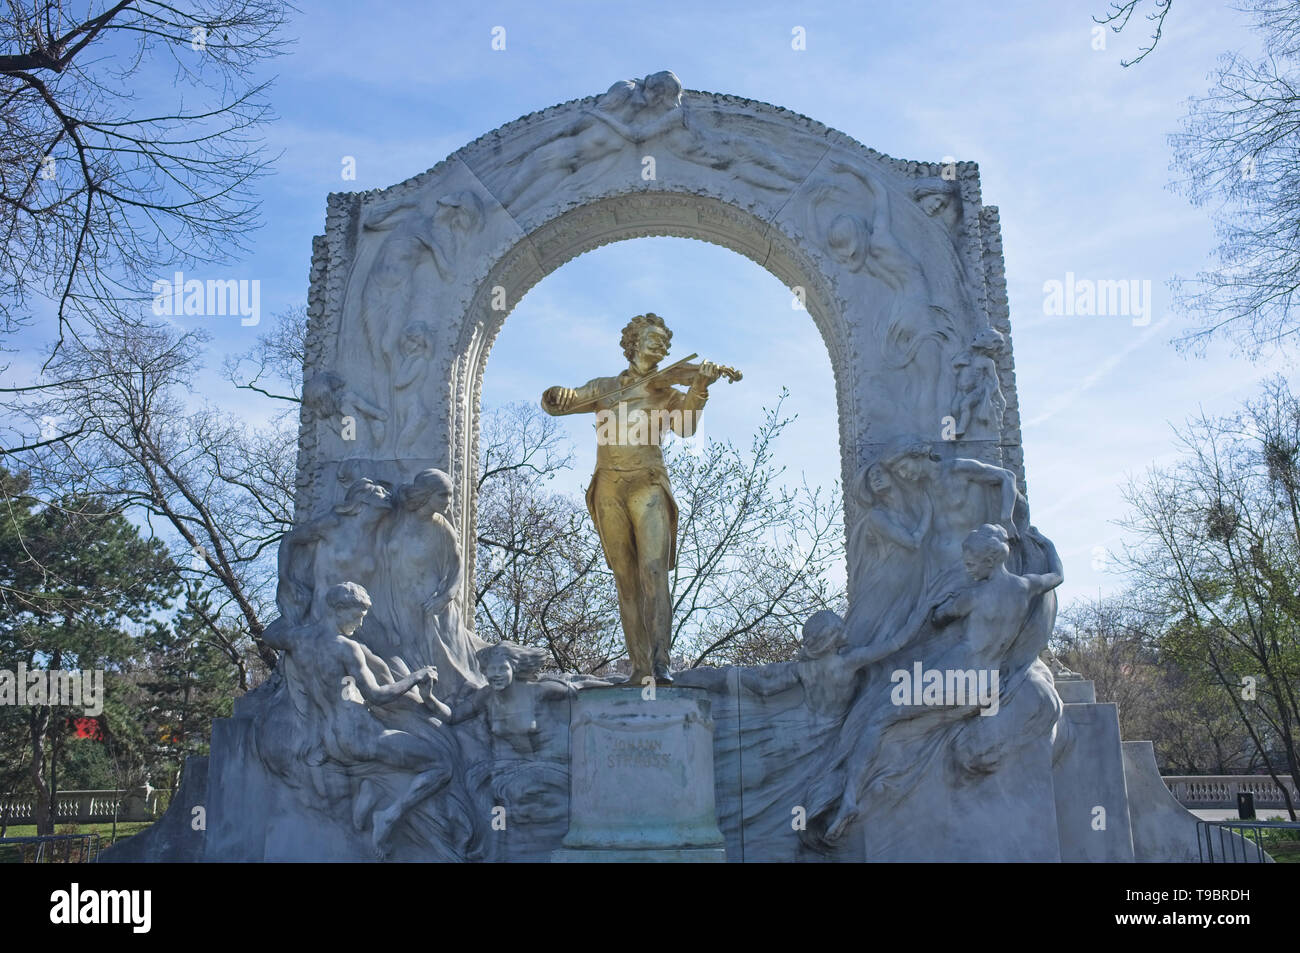 A statue of Johann Strauss in a park in Vienna Stock Photo